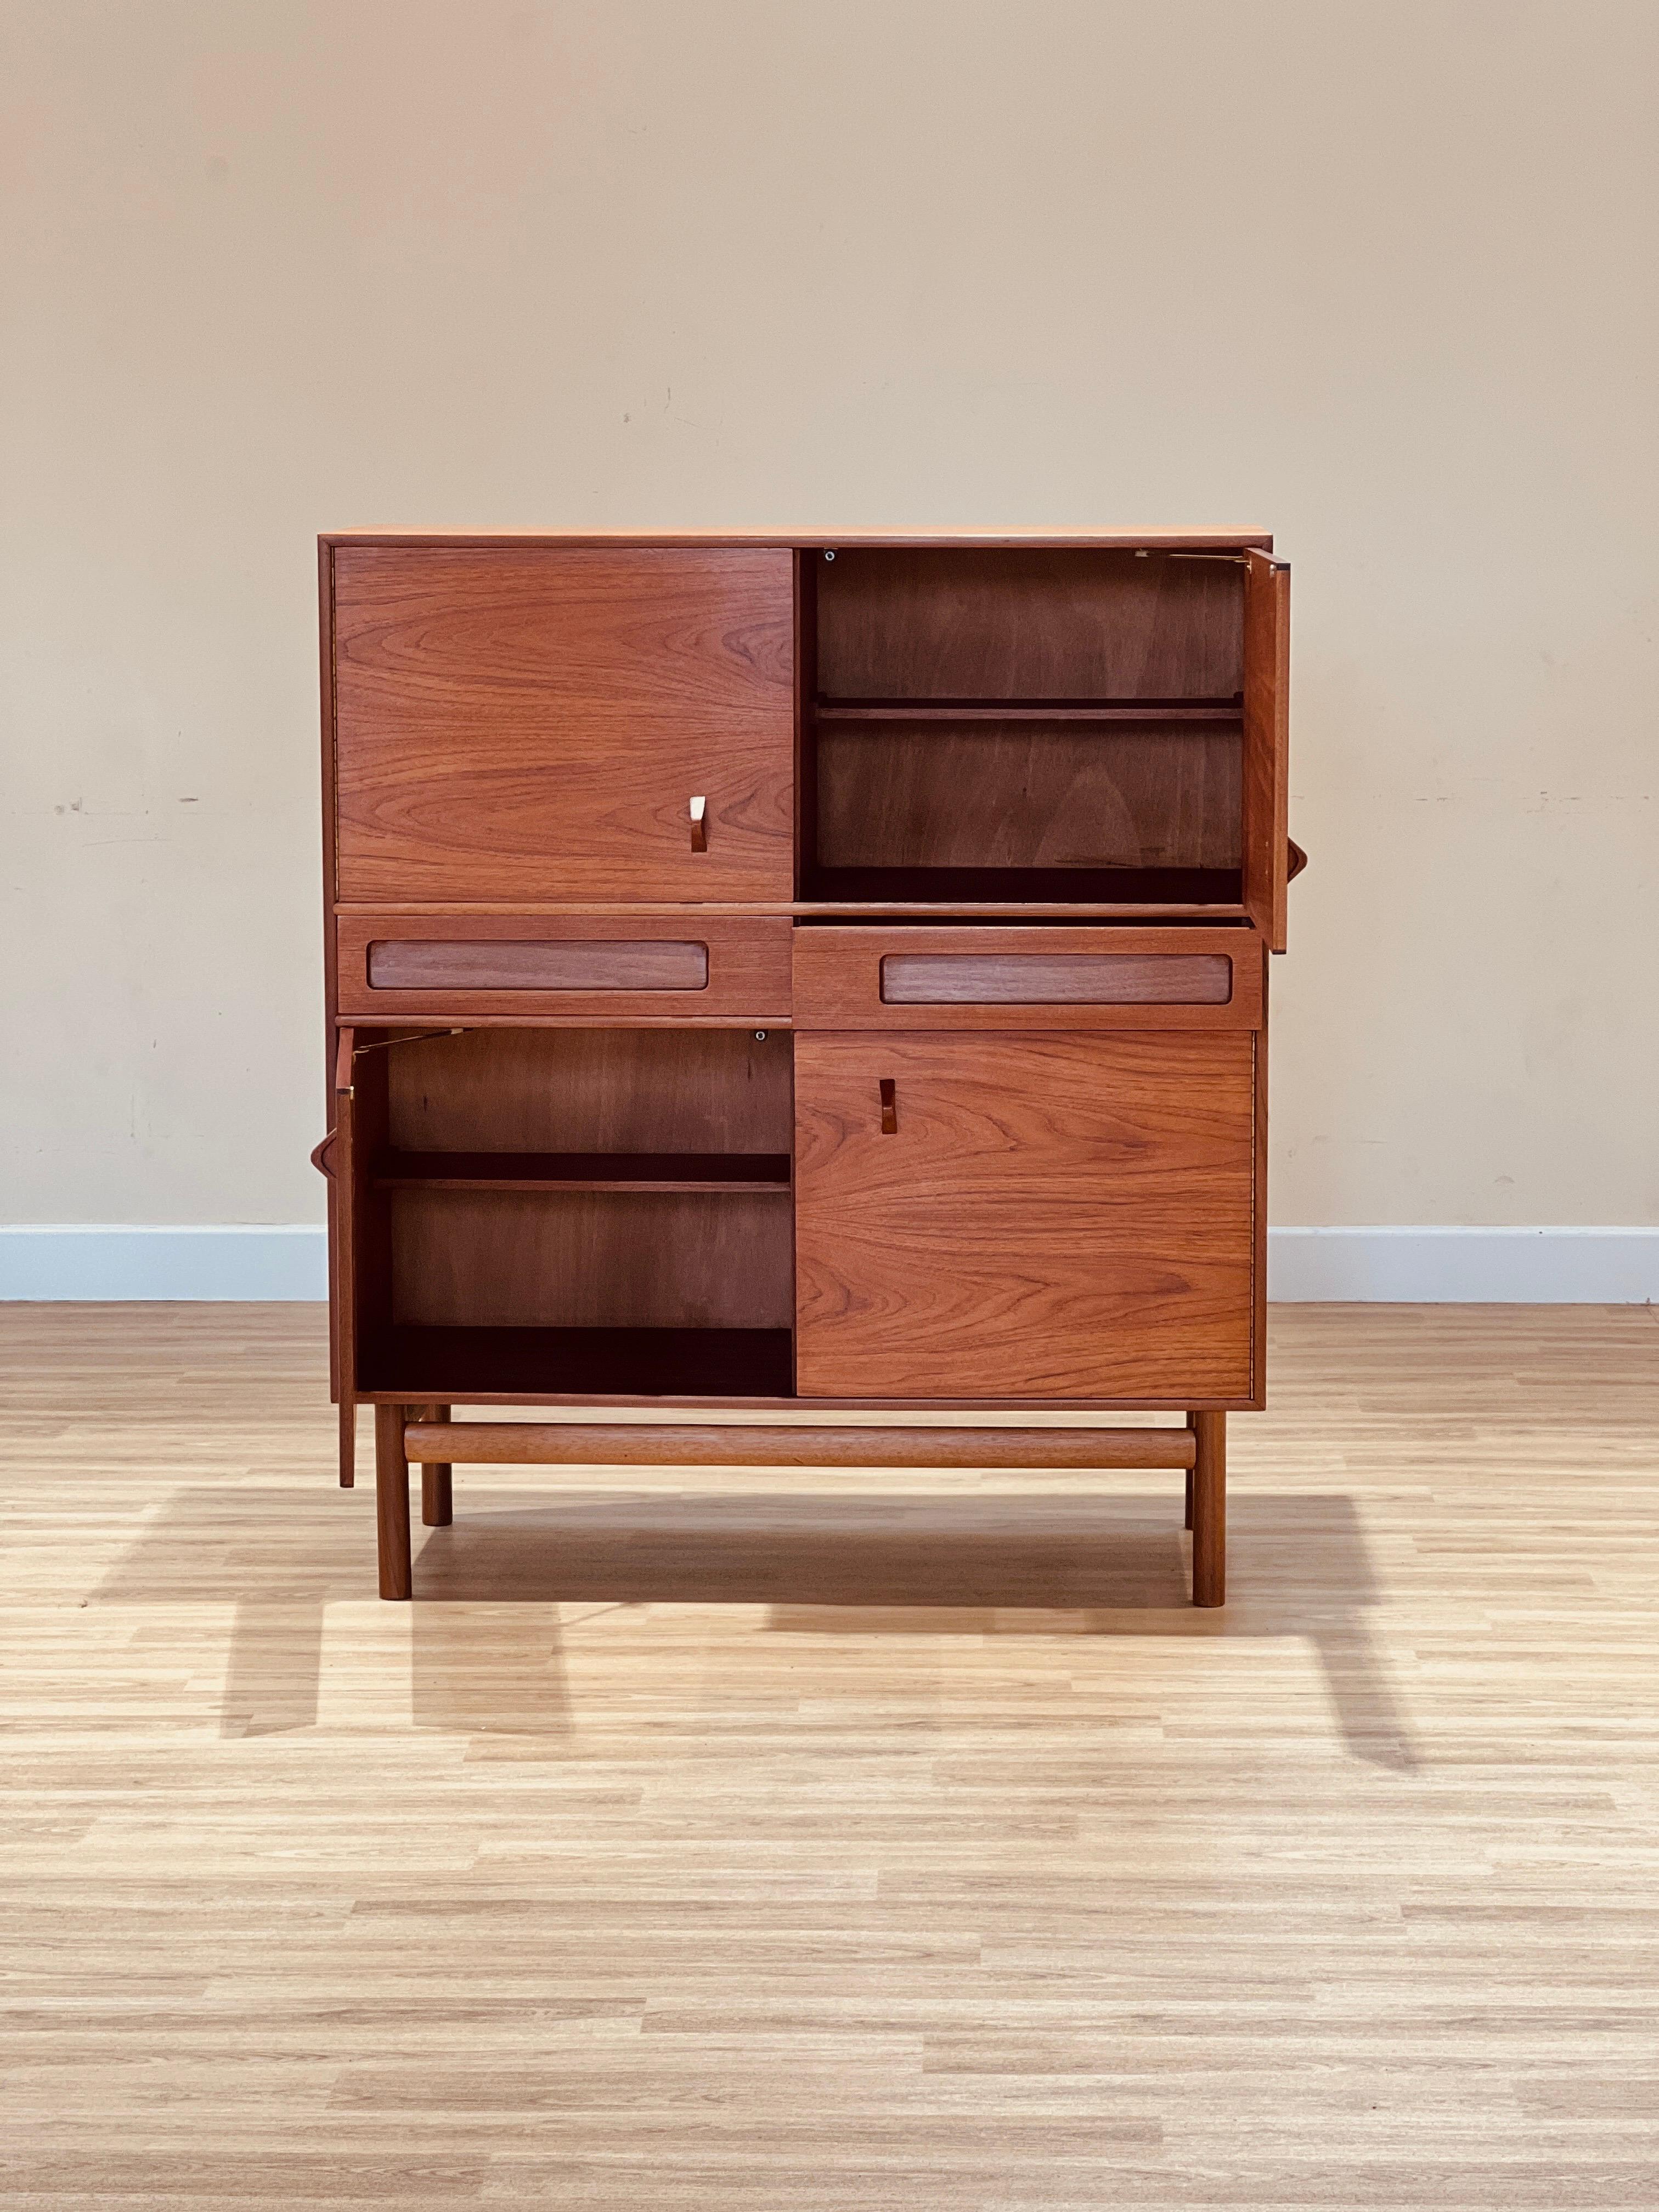 Tom Robertson designed this sideboard in the early ’70s for the well-known brand A.H. McIntosh in Scotland. This time, Tom Robertson made a taller sideboard—this beautiful cabinet with four cupboards and two teakwood drawers. The sideboard has four